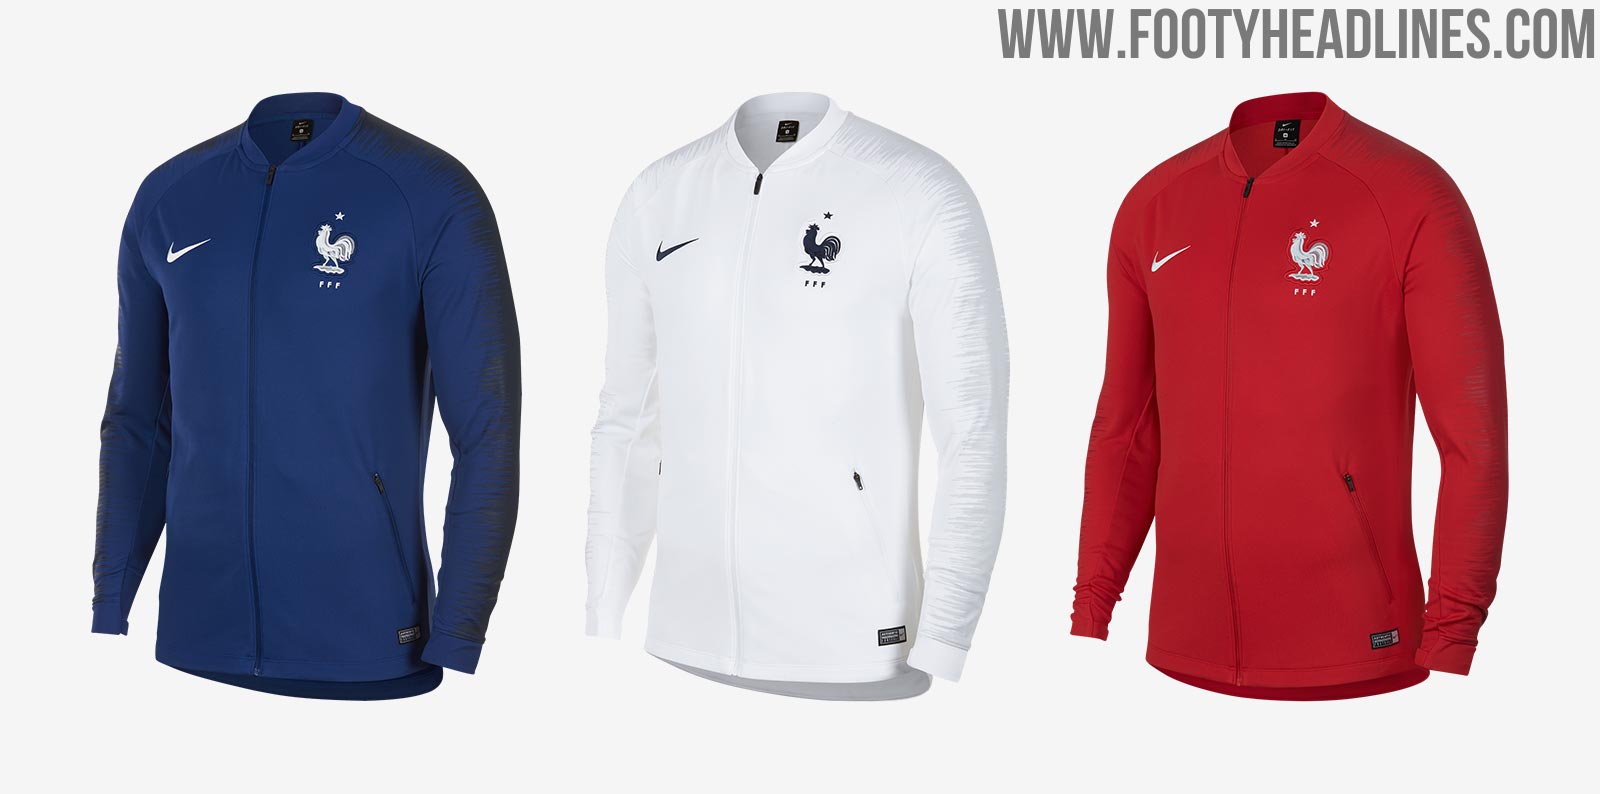 nike-france-2018-world-cup-collection-14.jpg